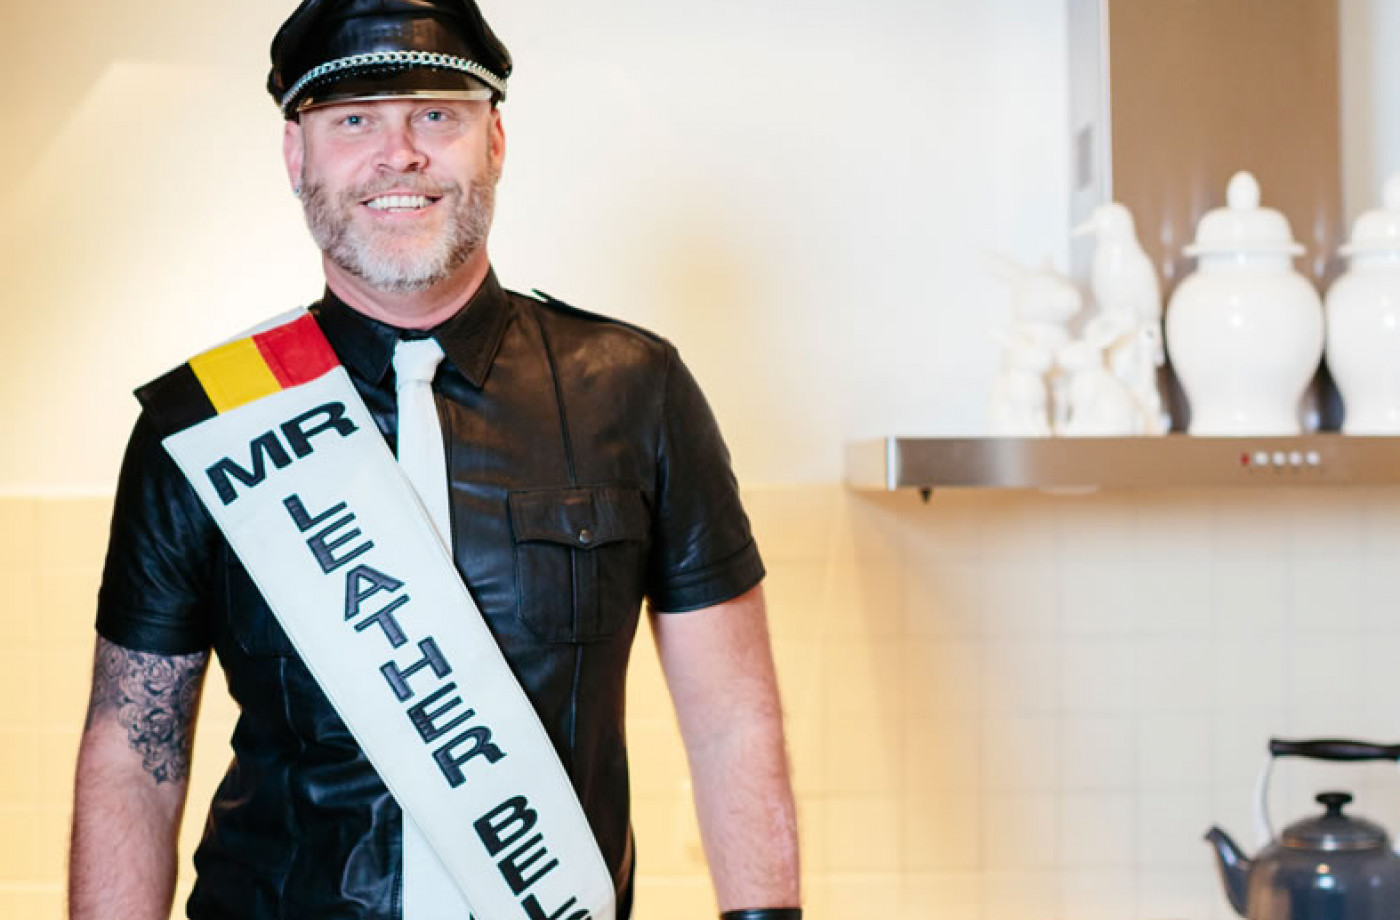 Georges Peeters is Mister Leather